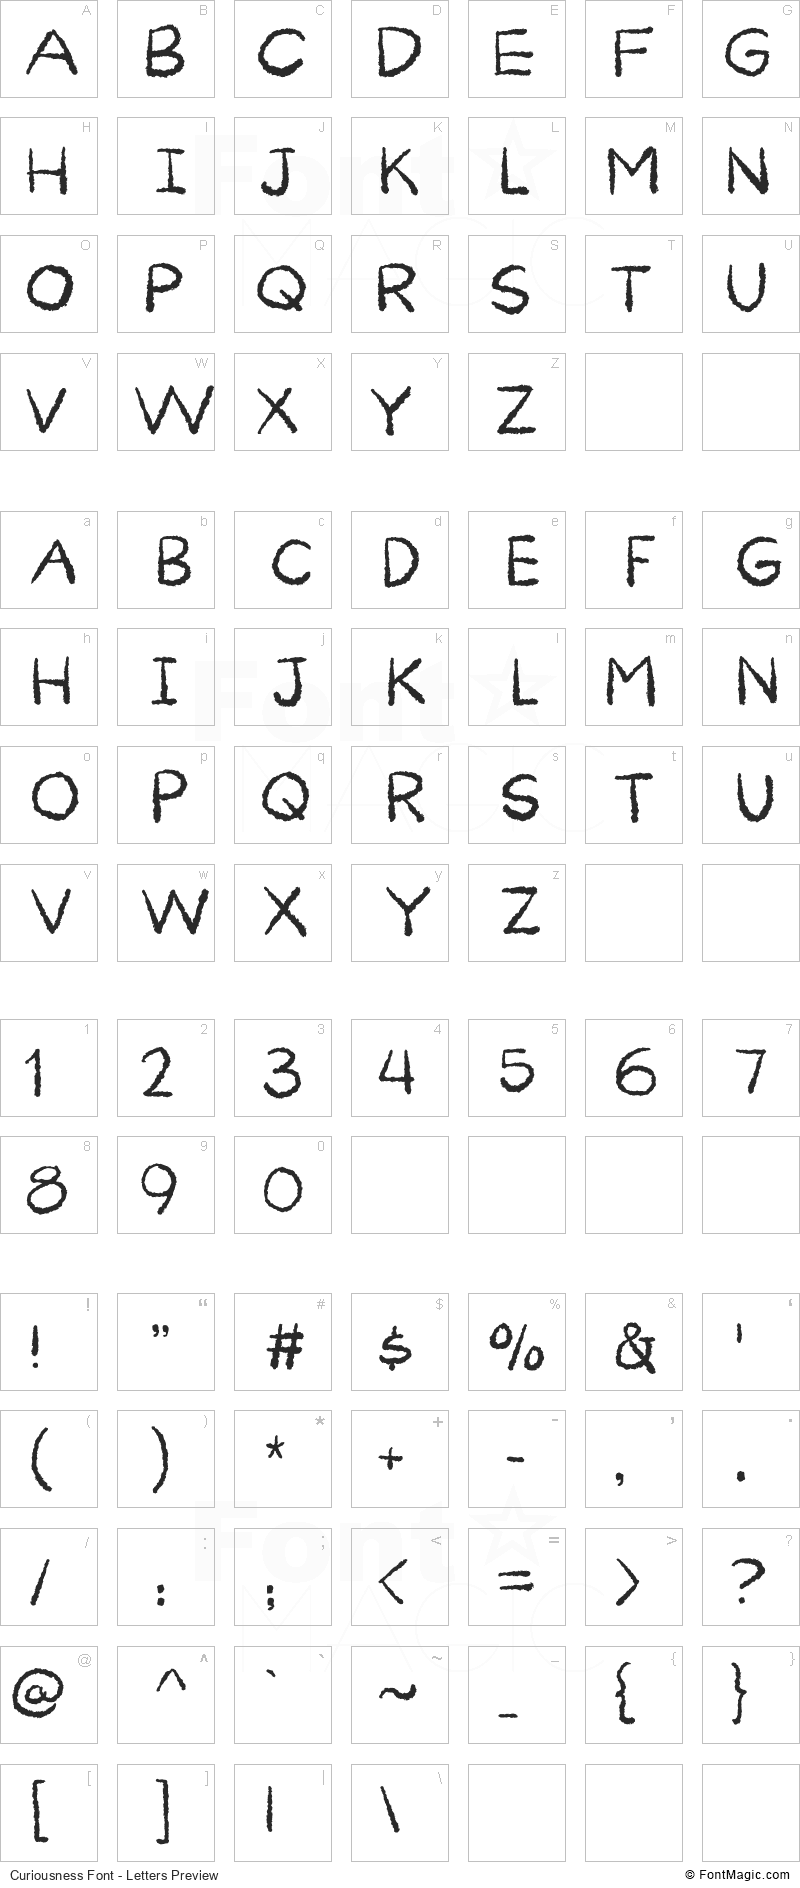 Curiousness Font - All Latters Preview Chart